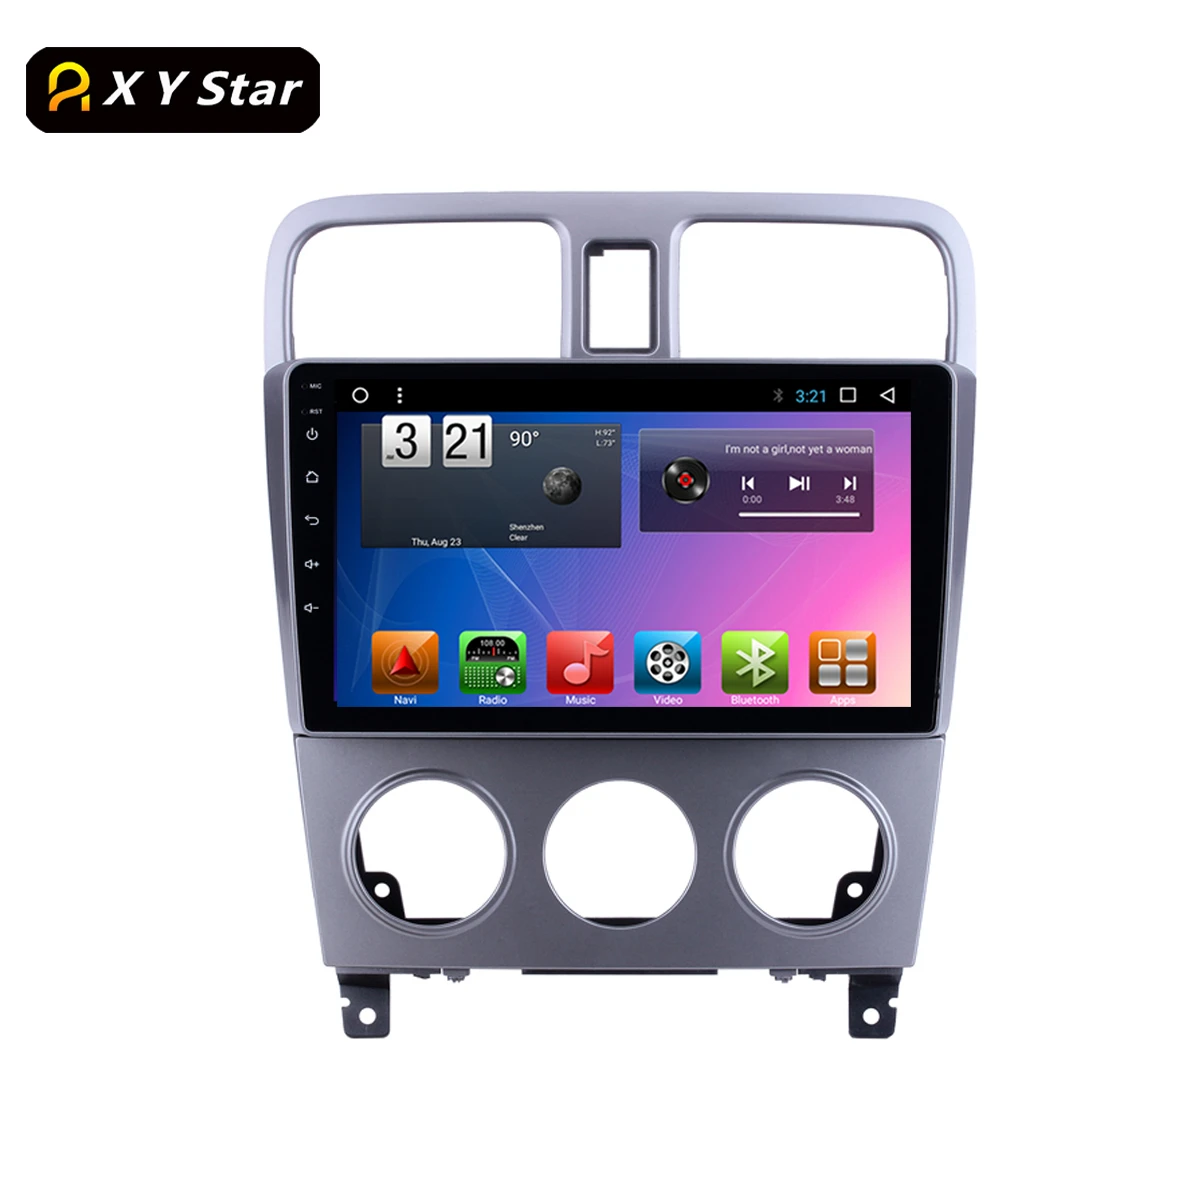 XYSTAR  XY-1014 Octa core Android 9.0 Car DVD Player GPS Navigation auto radio For  Forester 2004-2007